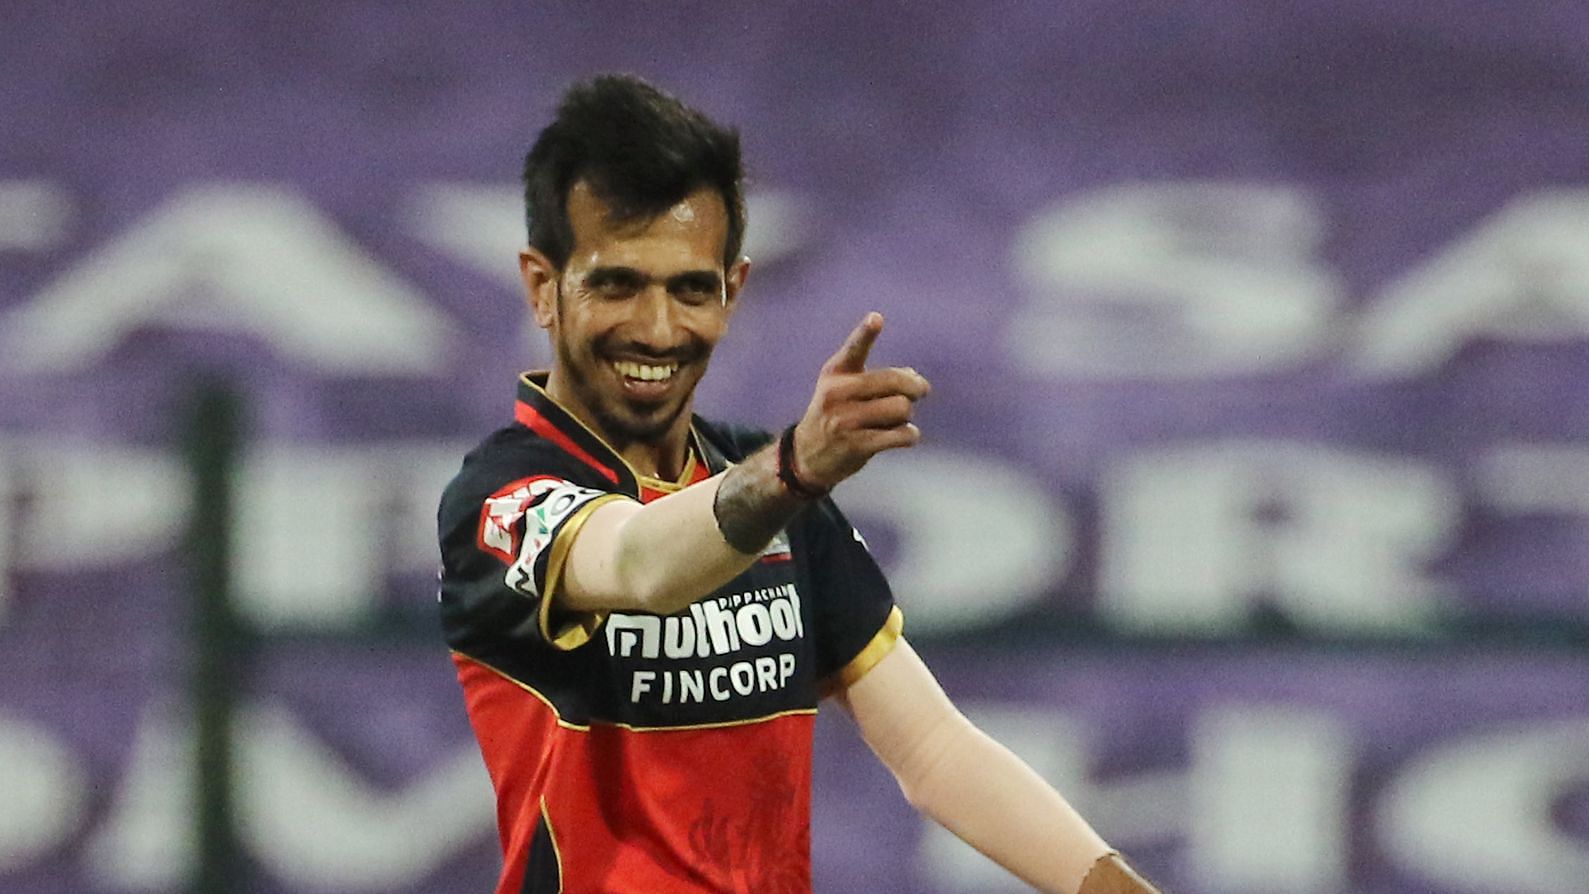 What’s been the secret of Yuzvendra Chahal’s success this IPL season?